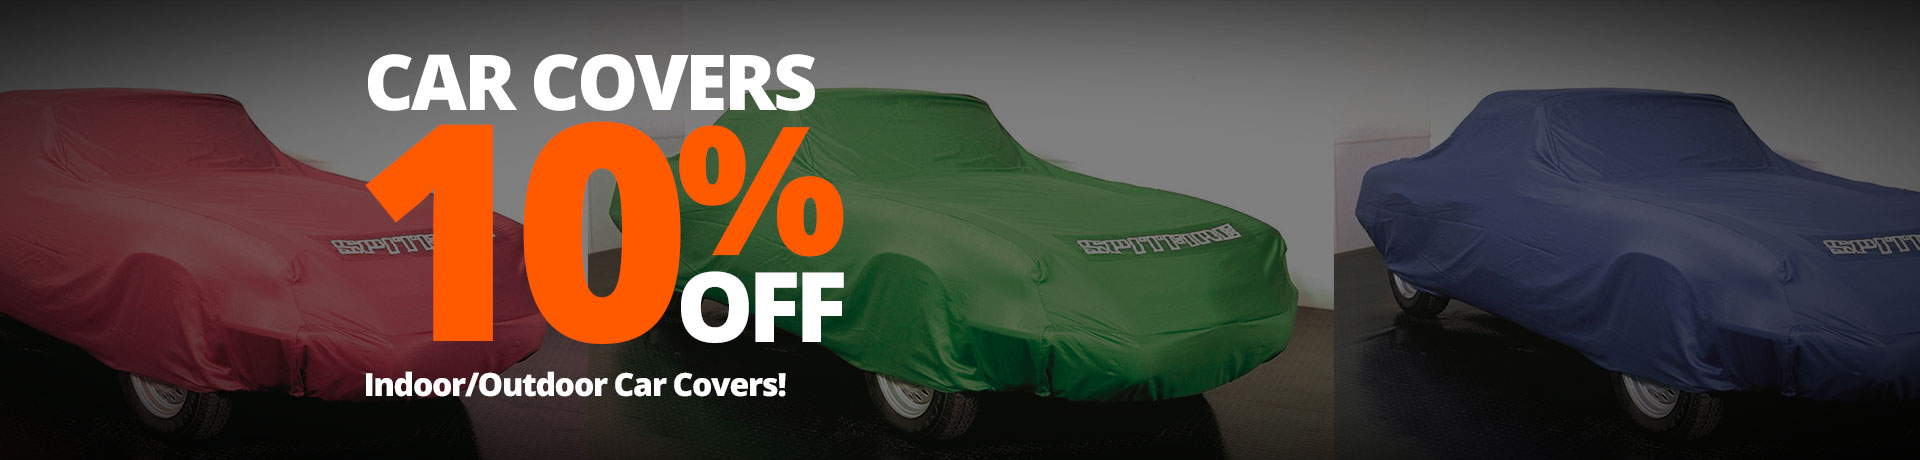 Car Covers Sale